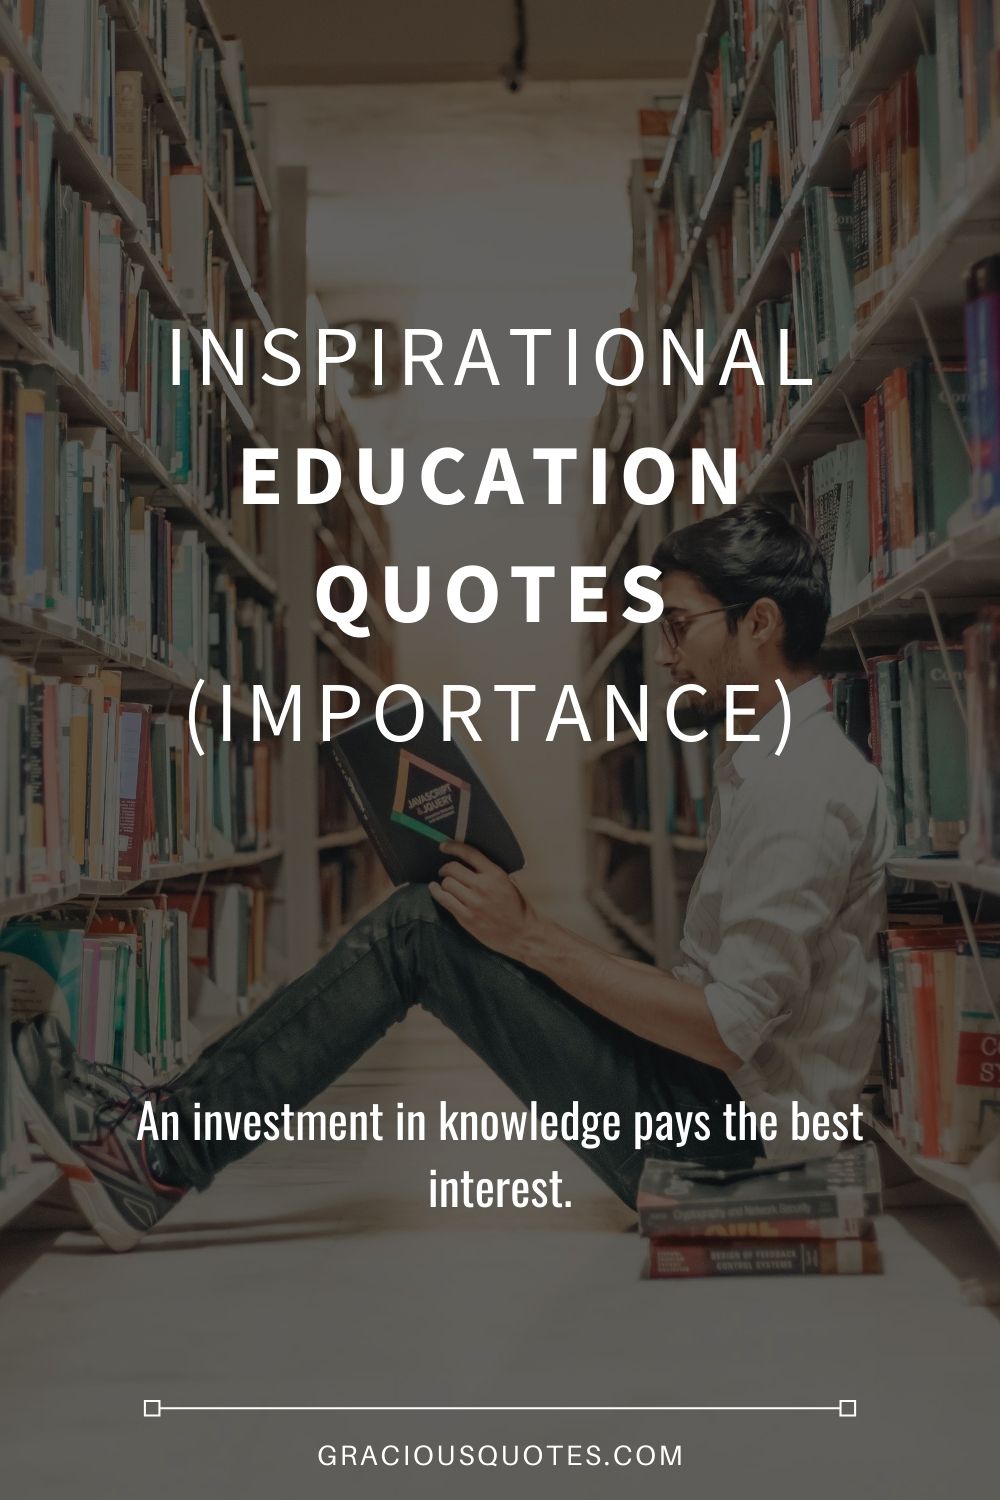 Inspirational Education Quotes (IMPORTANCE) - Gracious Quotes